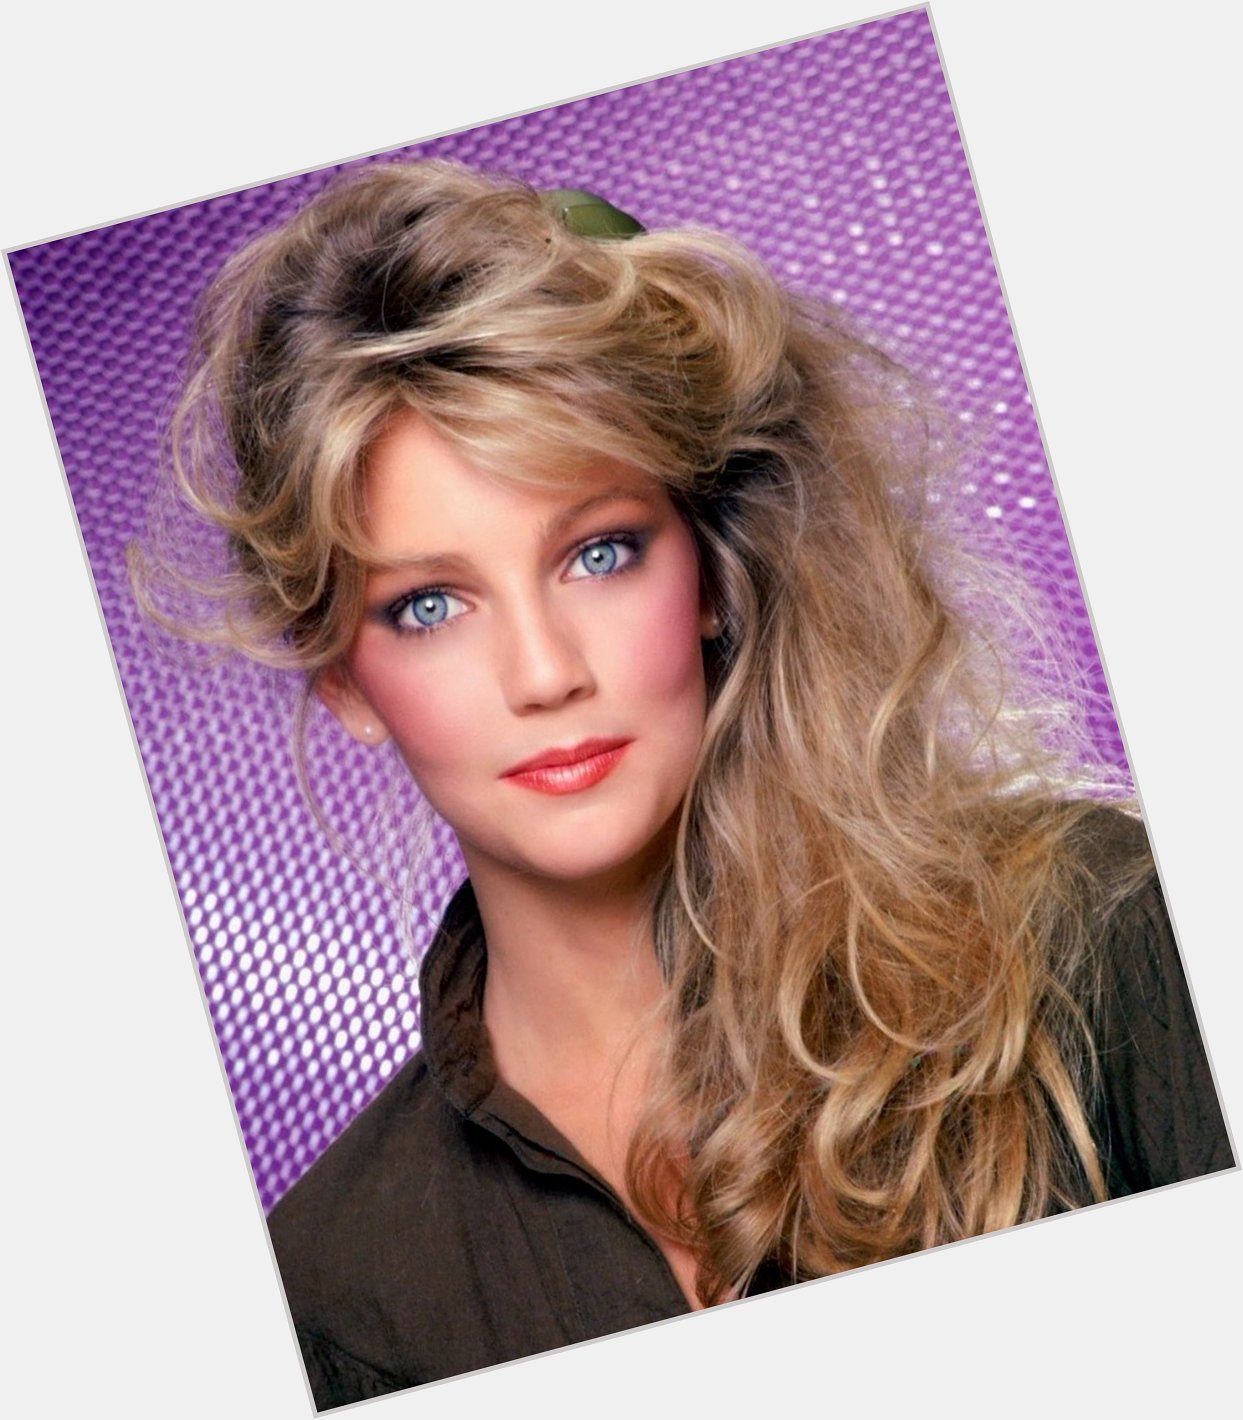 Heather Locklear September 25 Sending Very Happy Birthday Wishes! All the Best! 